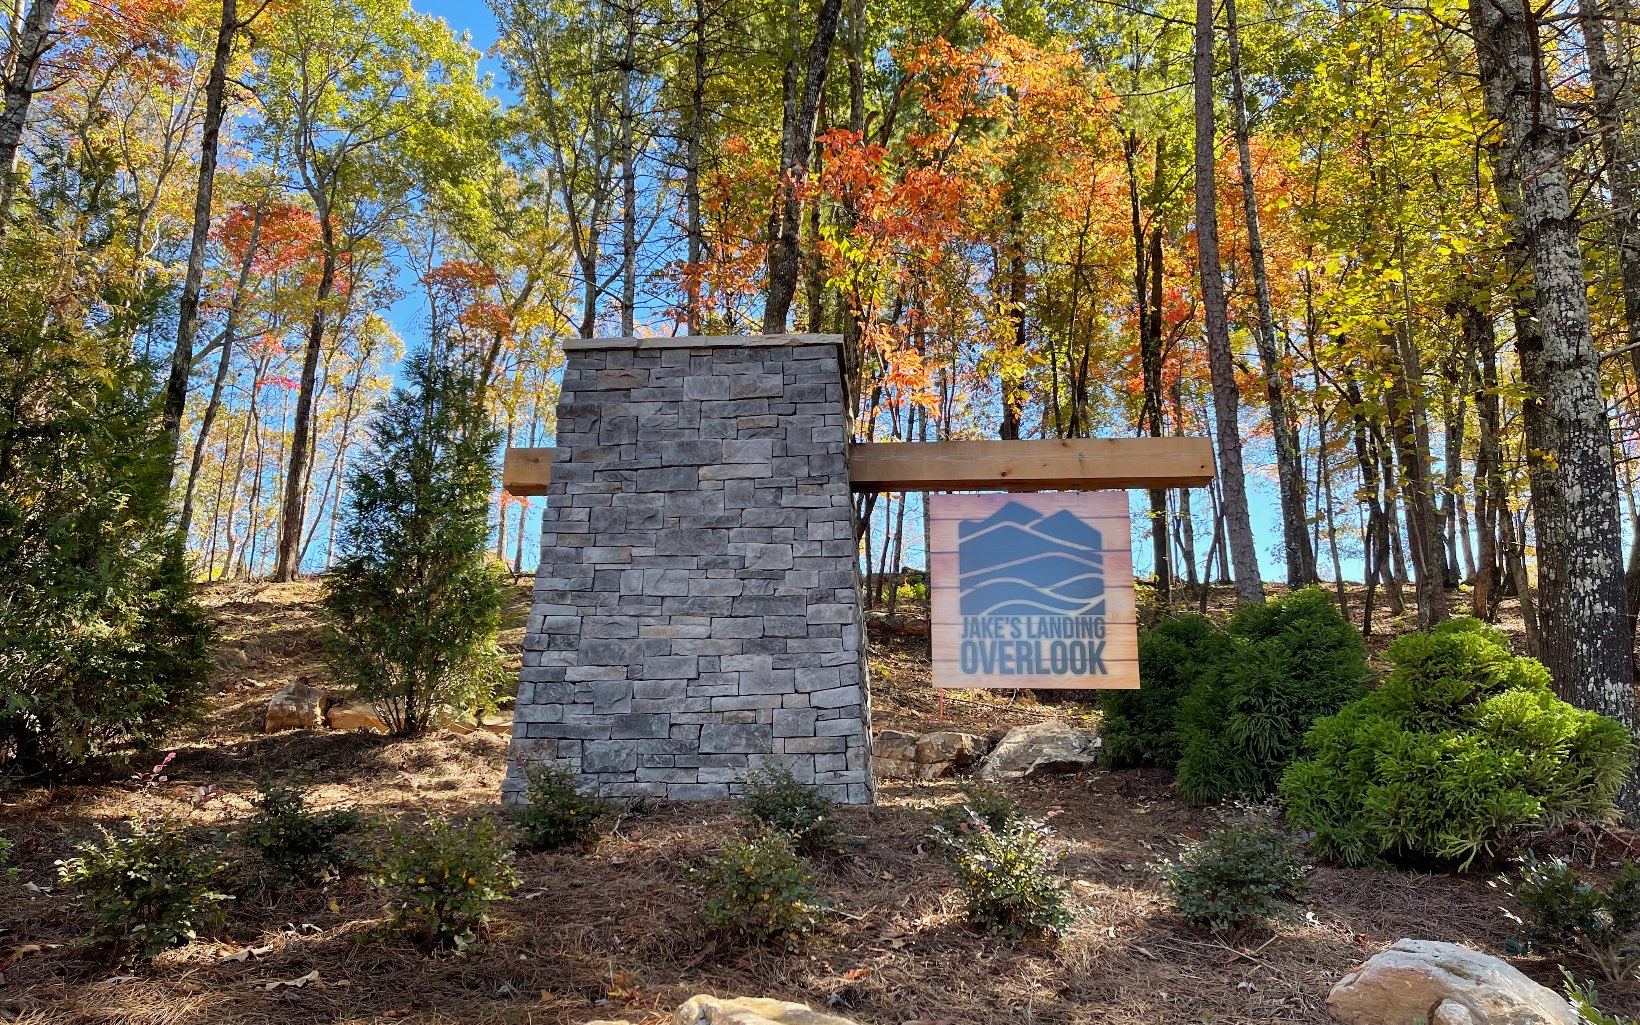 Welcome to Jake's Landing Overlook, a breathtaking new development just next to Carter's Lake's Ridgeway Recreation area with a boat ramp, dock, picnic tables, hiking trails etc. 20 minutes from scenic Ellijay, GA. Enjoy the long range views throughout the gated community. Lot 77 has gentle level area and a small spring fed creek at the back left corner of property and a community well on back right corner. Vacation rentals allowed! Community has unique access to Jake's Landing waterfalls and trout stream. Community in-ground pool coming soon, pavilion, fire pit, trails. Make this your full time or vacation home. One of few subdivisions which allow owners to build small homes from 500-1200 square feet! Rare opportunity for tiny home people! Build your income-producing getaway now! FORBES:Ellijay, #9 highest vacay income-prod. USA town! High speed internet, underground utilities. Lot 79 available.